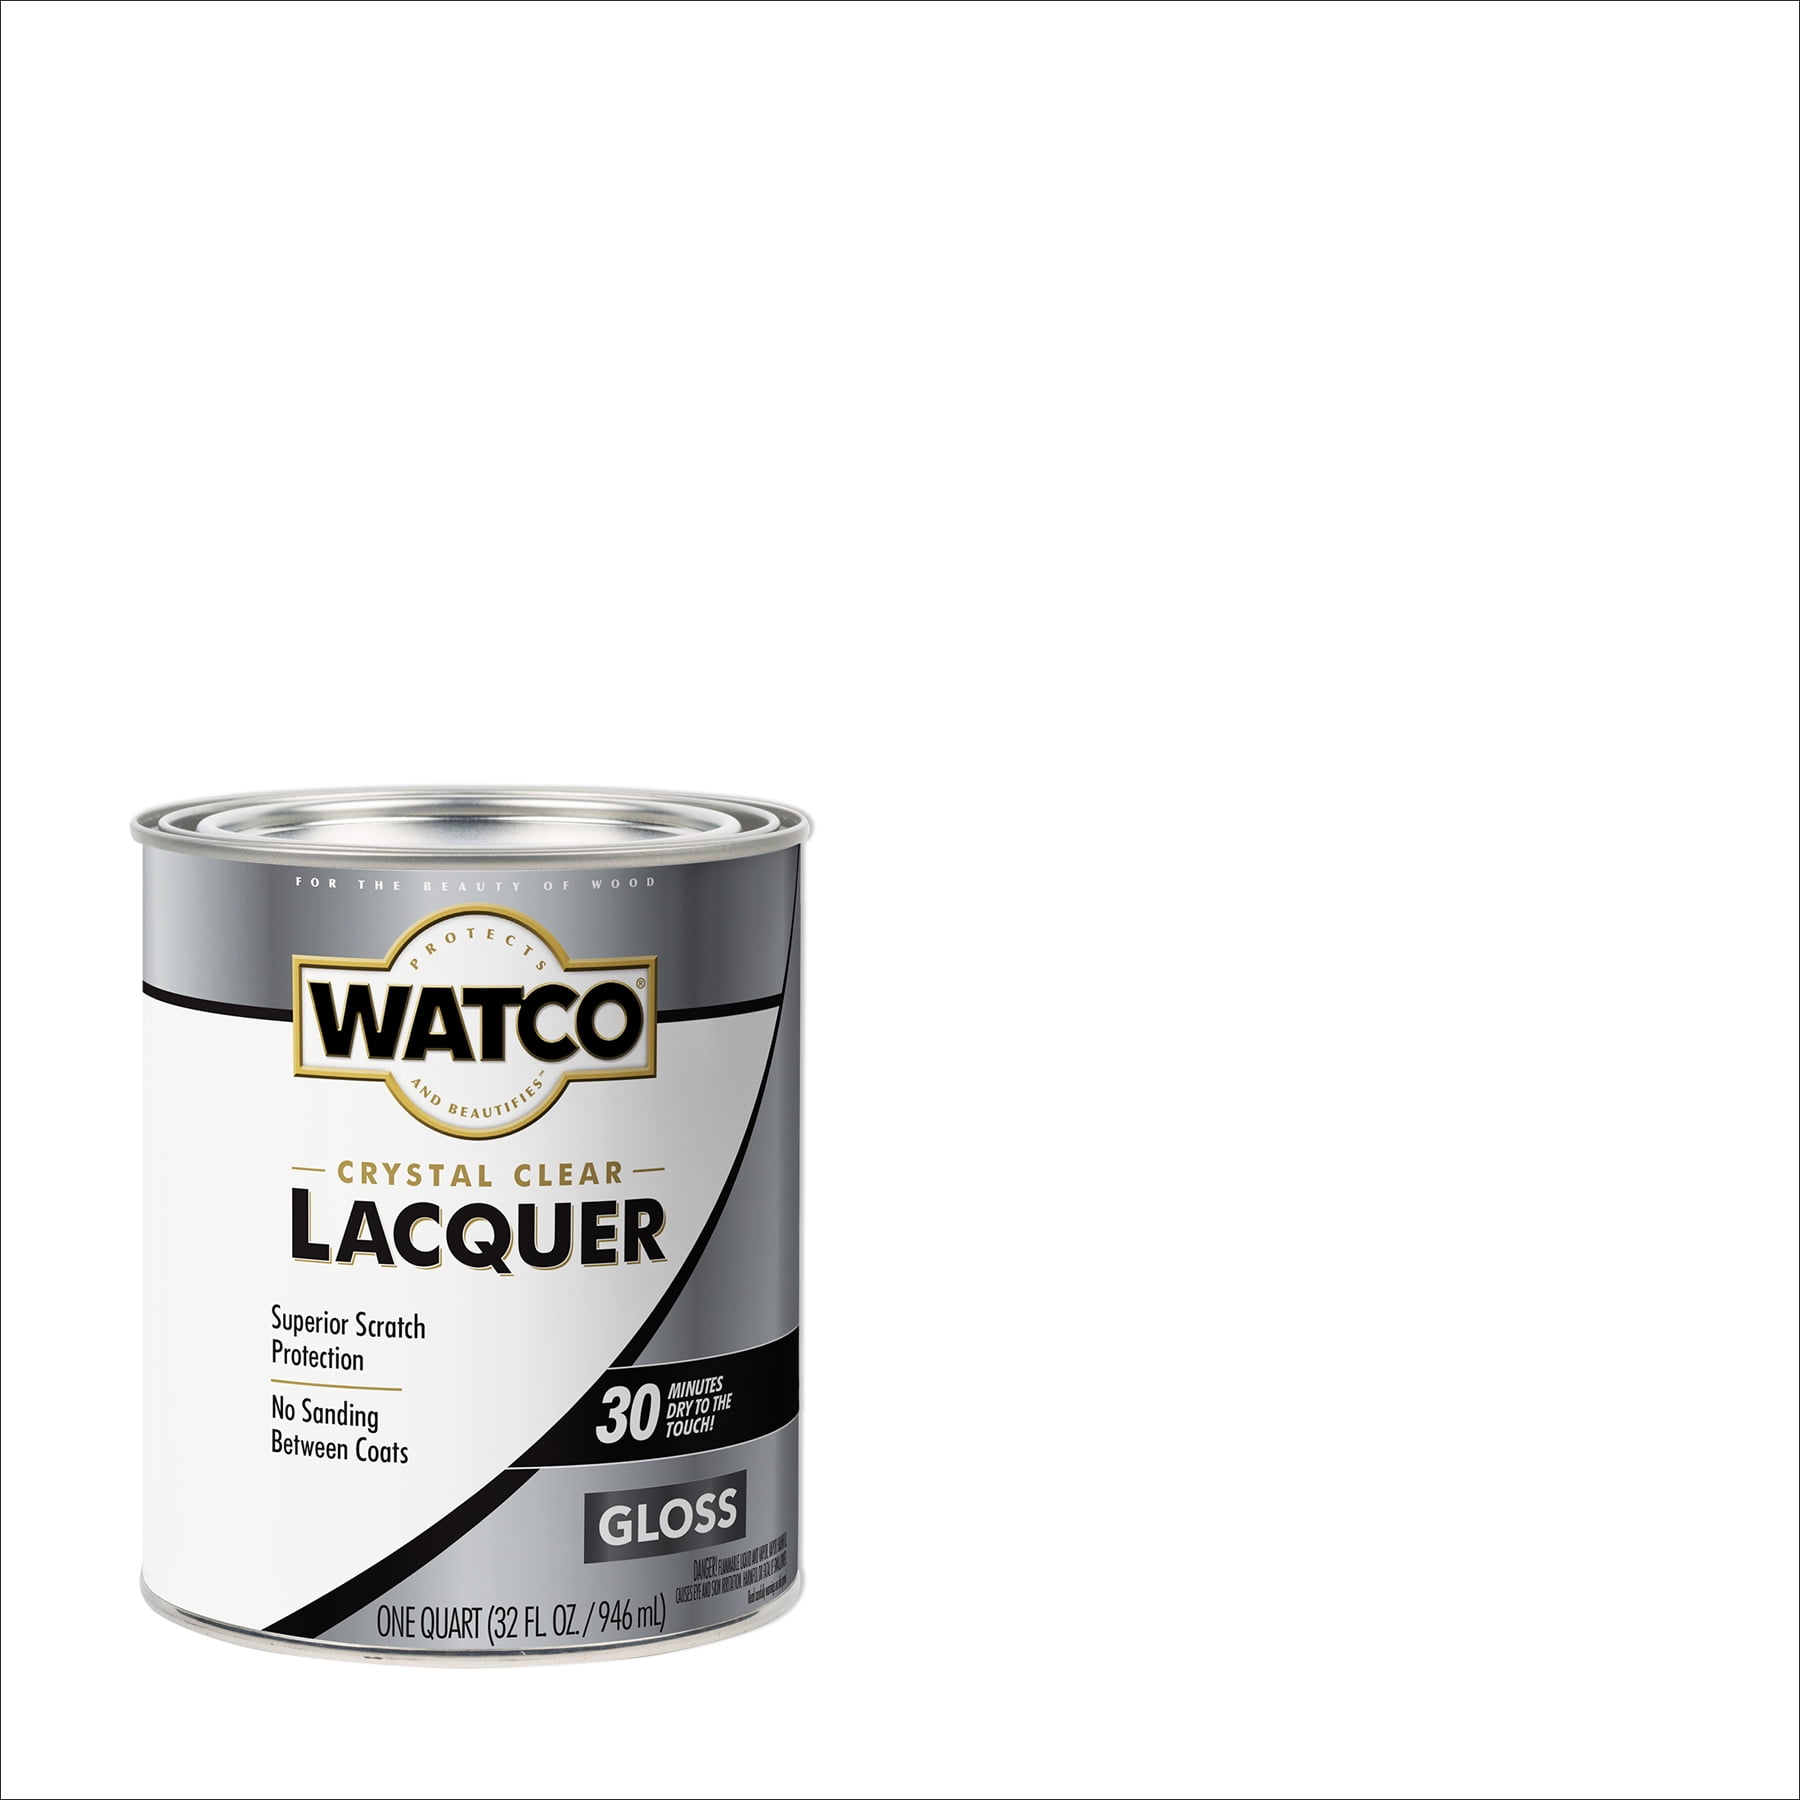 Clear, Watco Lacquer Gloss Wood Finish- 303238, Quart